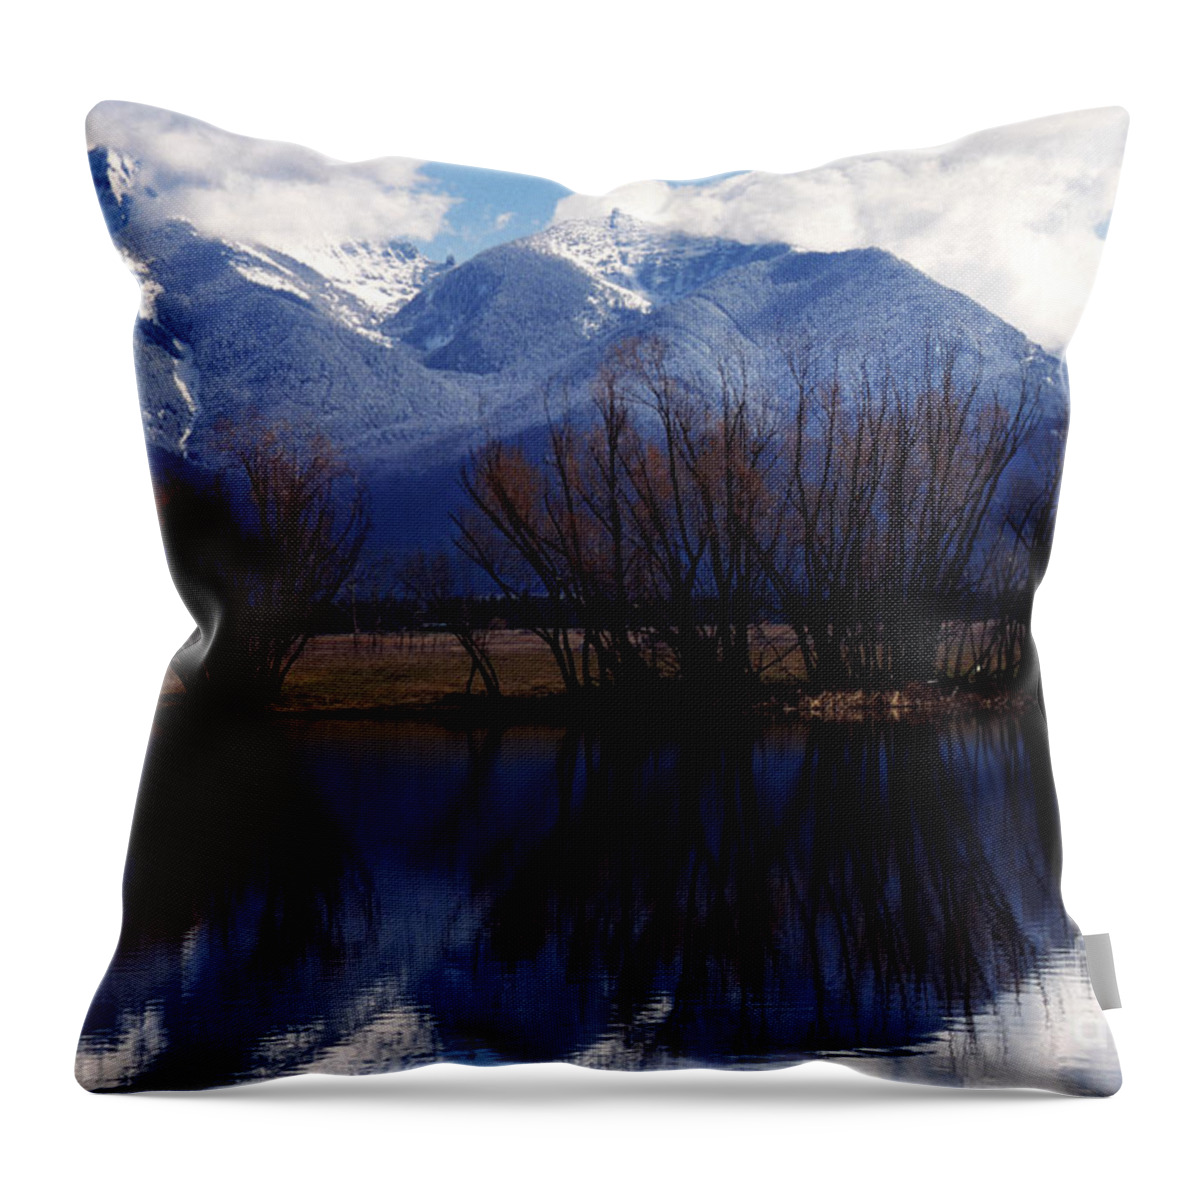 Mission Mountains Throw Pillow featuring the photograph Mission Mountains Montana by Thomas R Fletcher